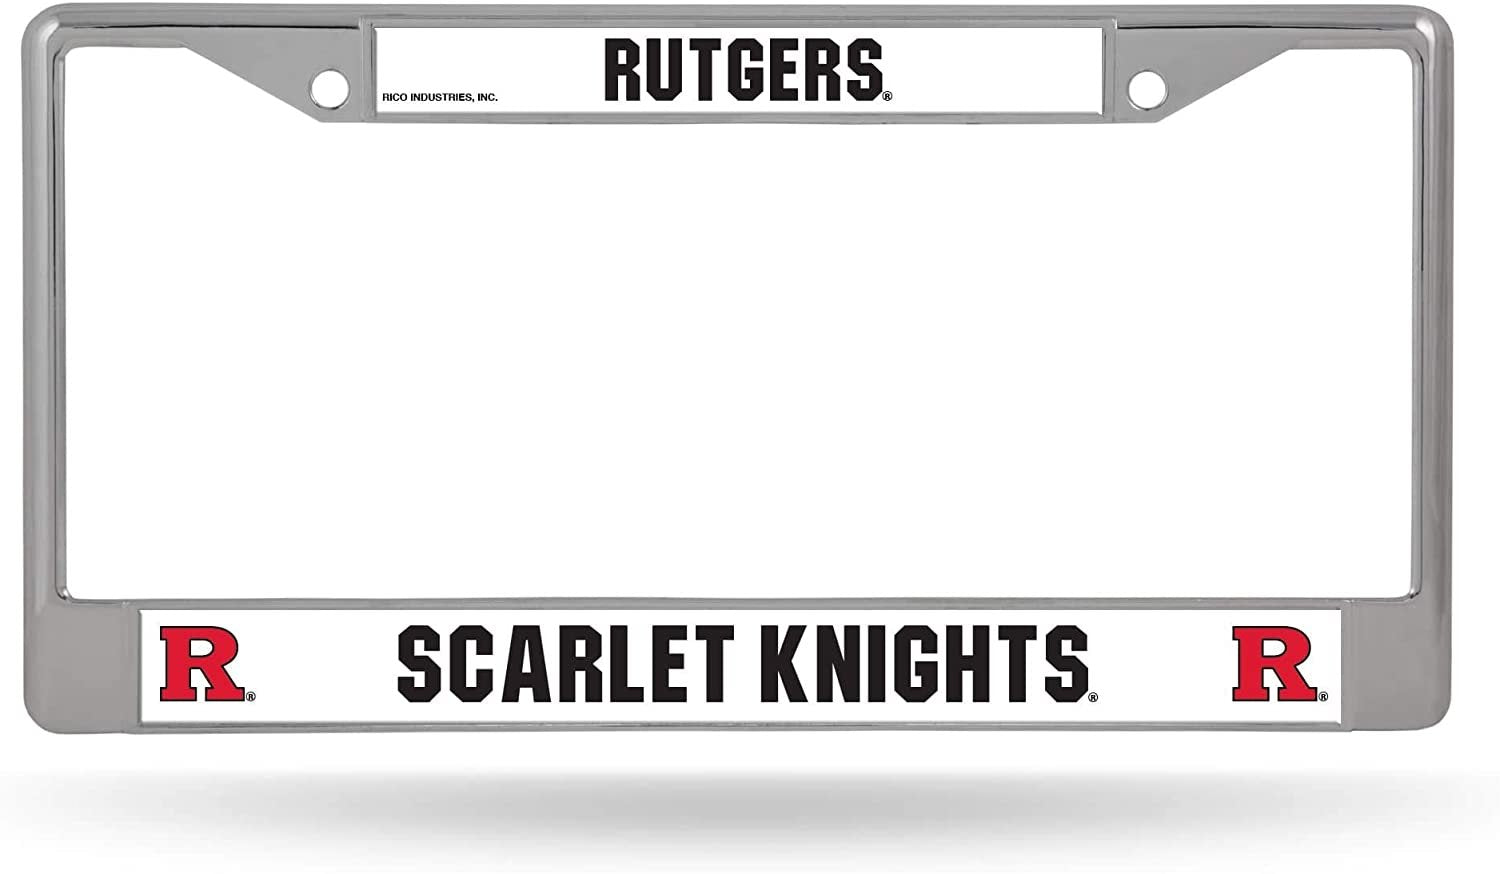 Rutgers University Scarlet Knights Premium Metal License Plate Frame Chrome Tag Cover, 12x6 Inch